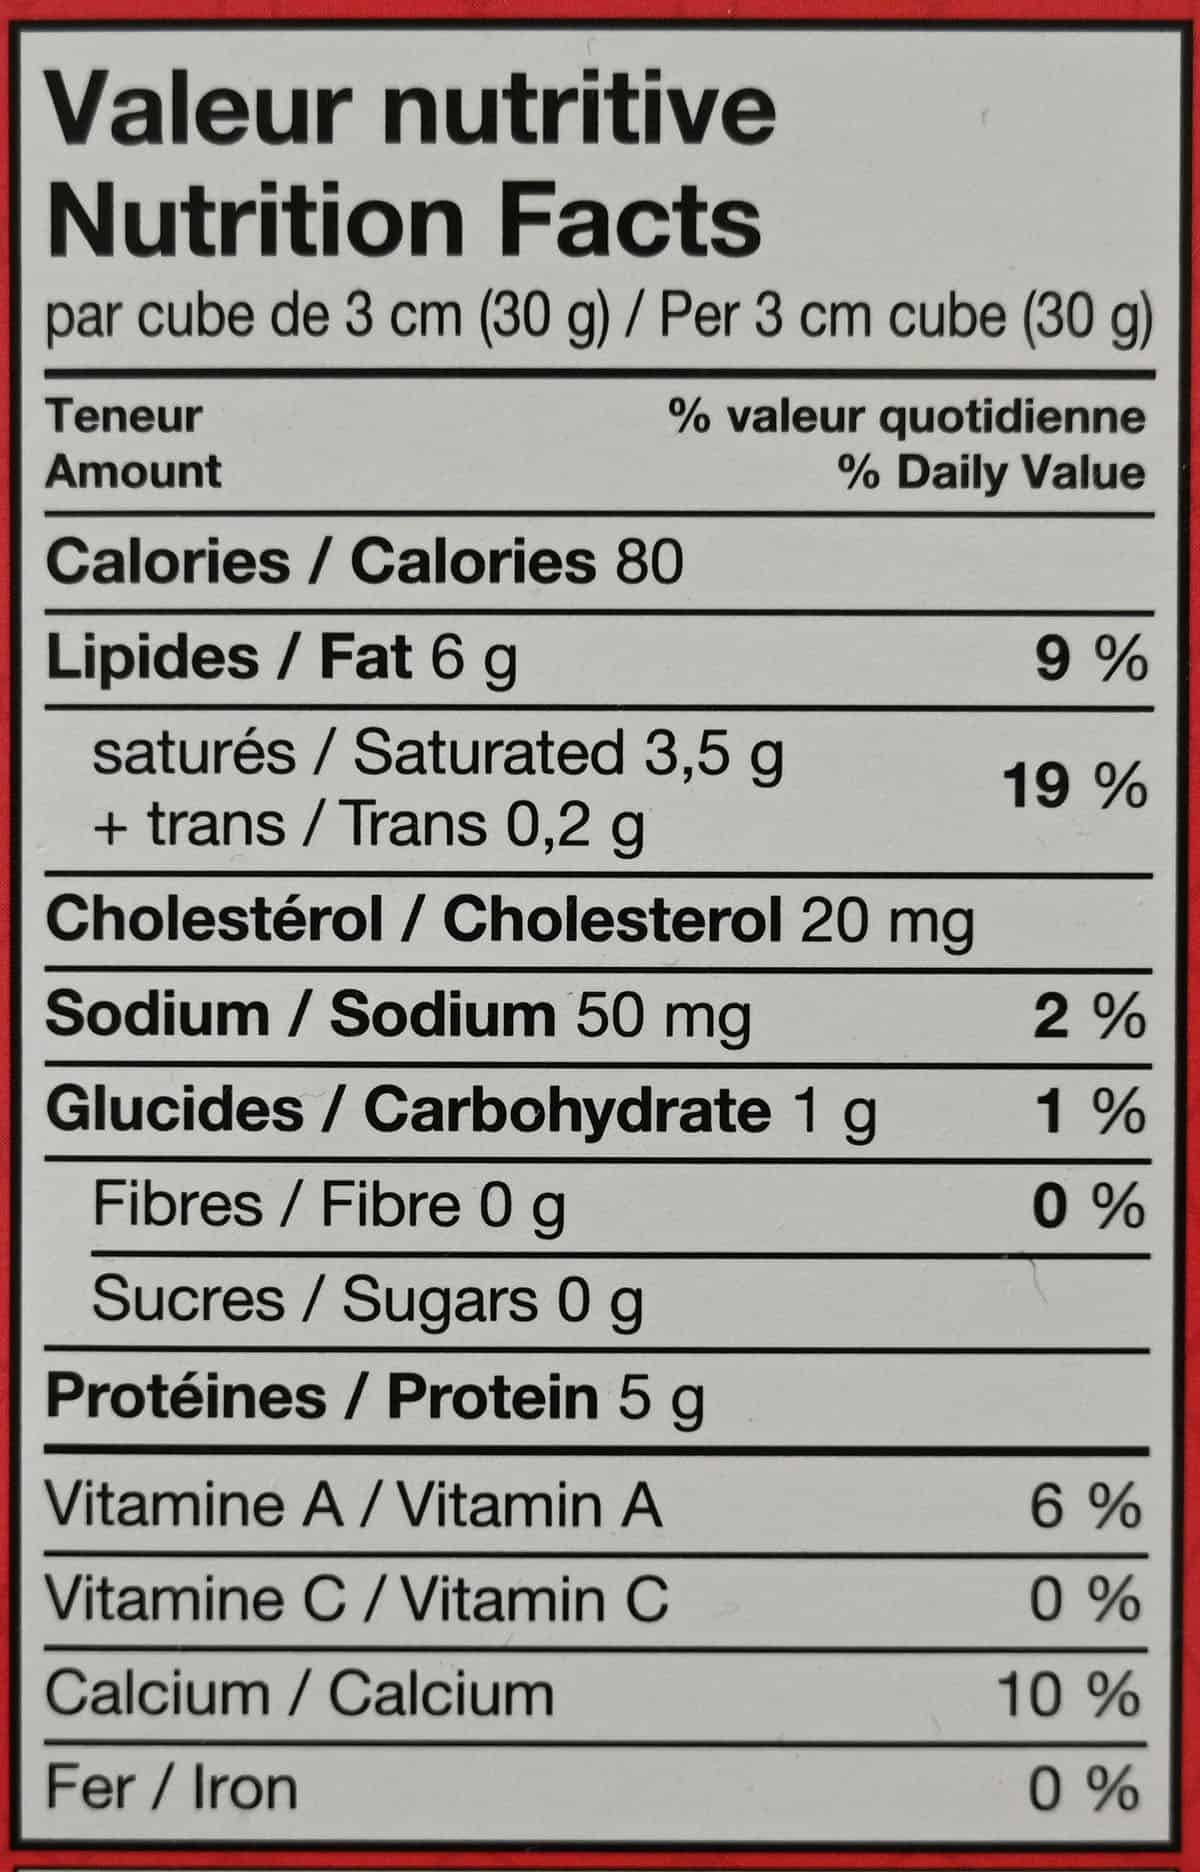 Nutrition facts from package.